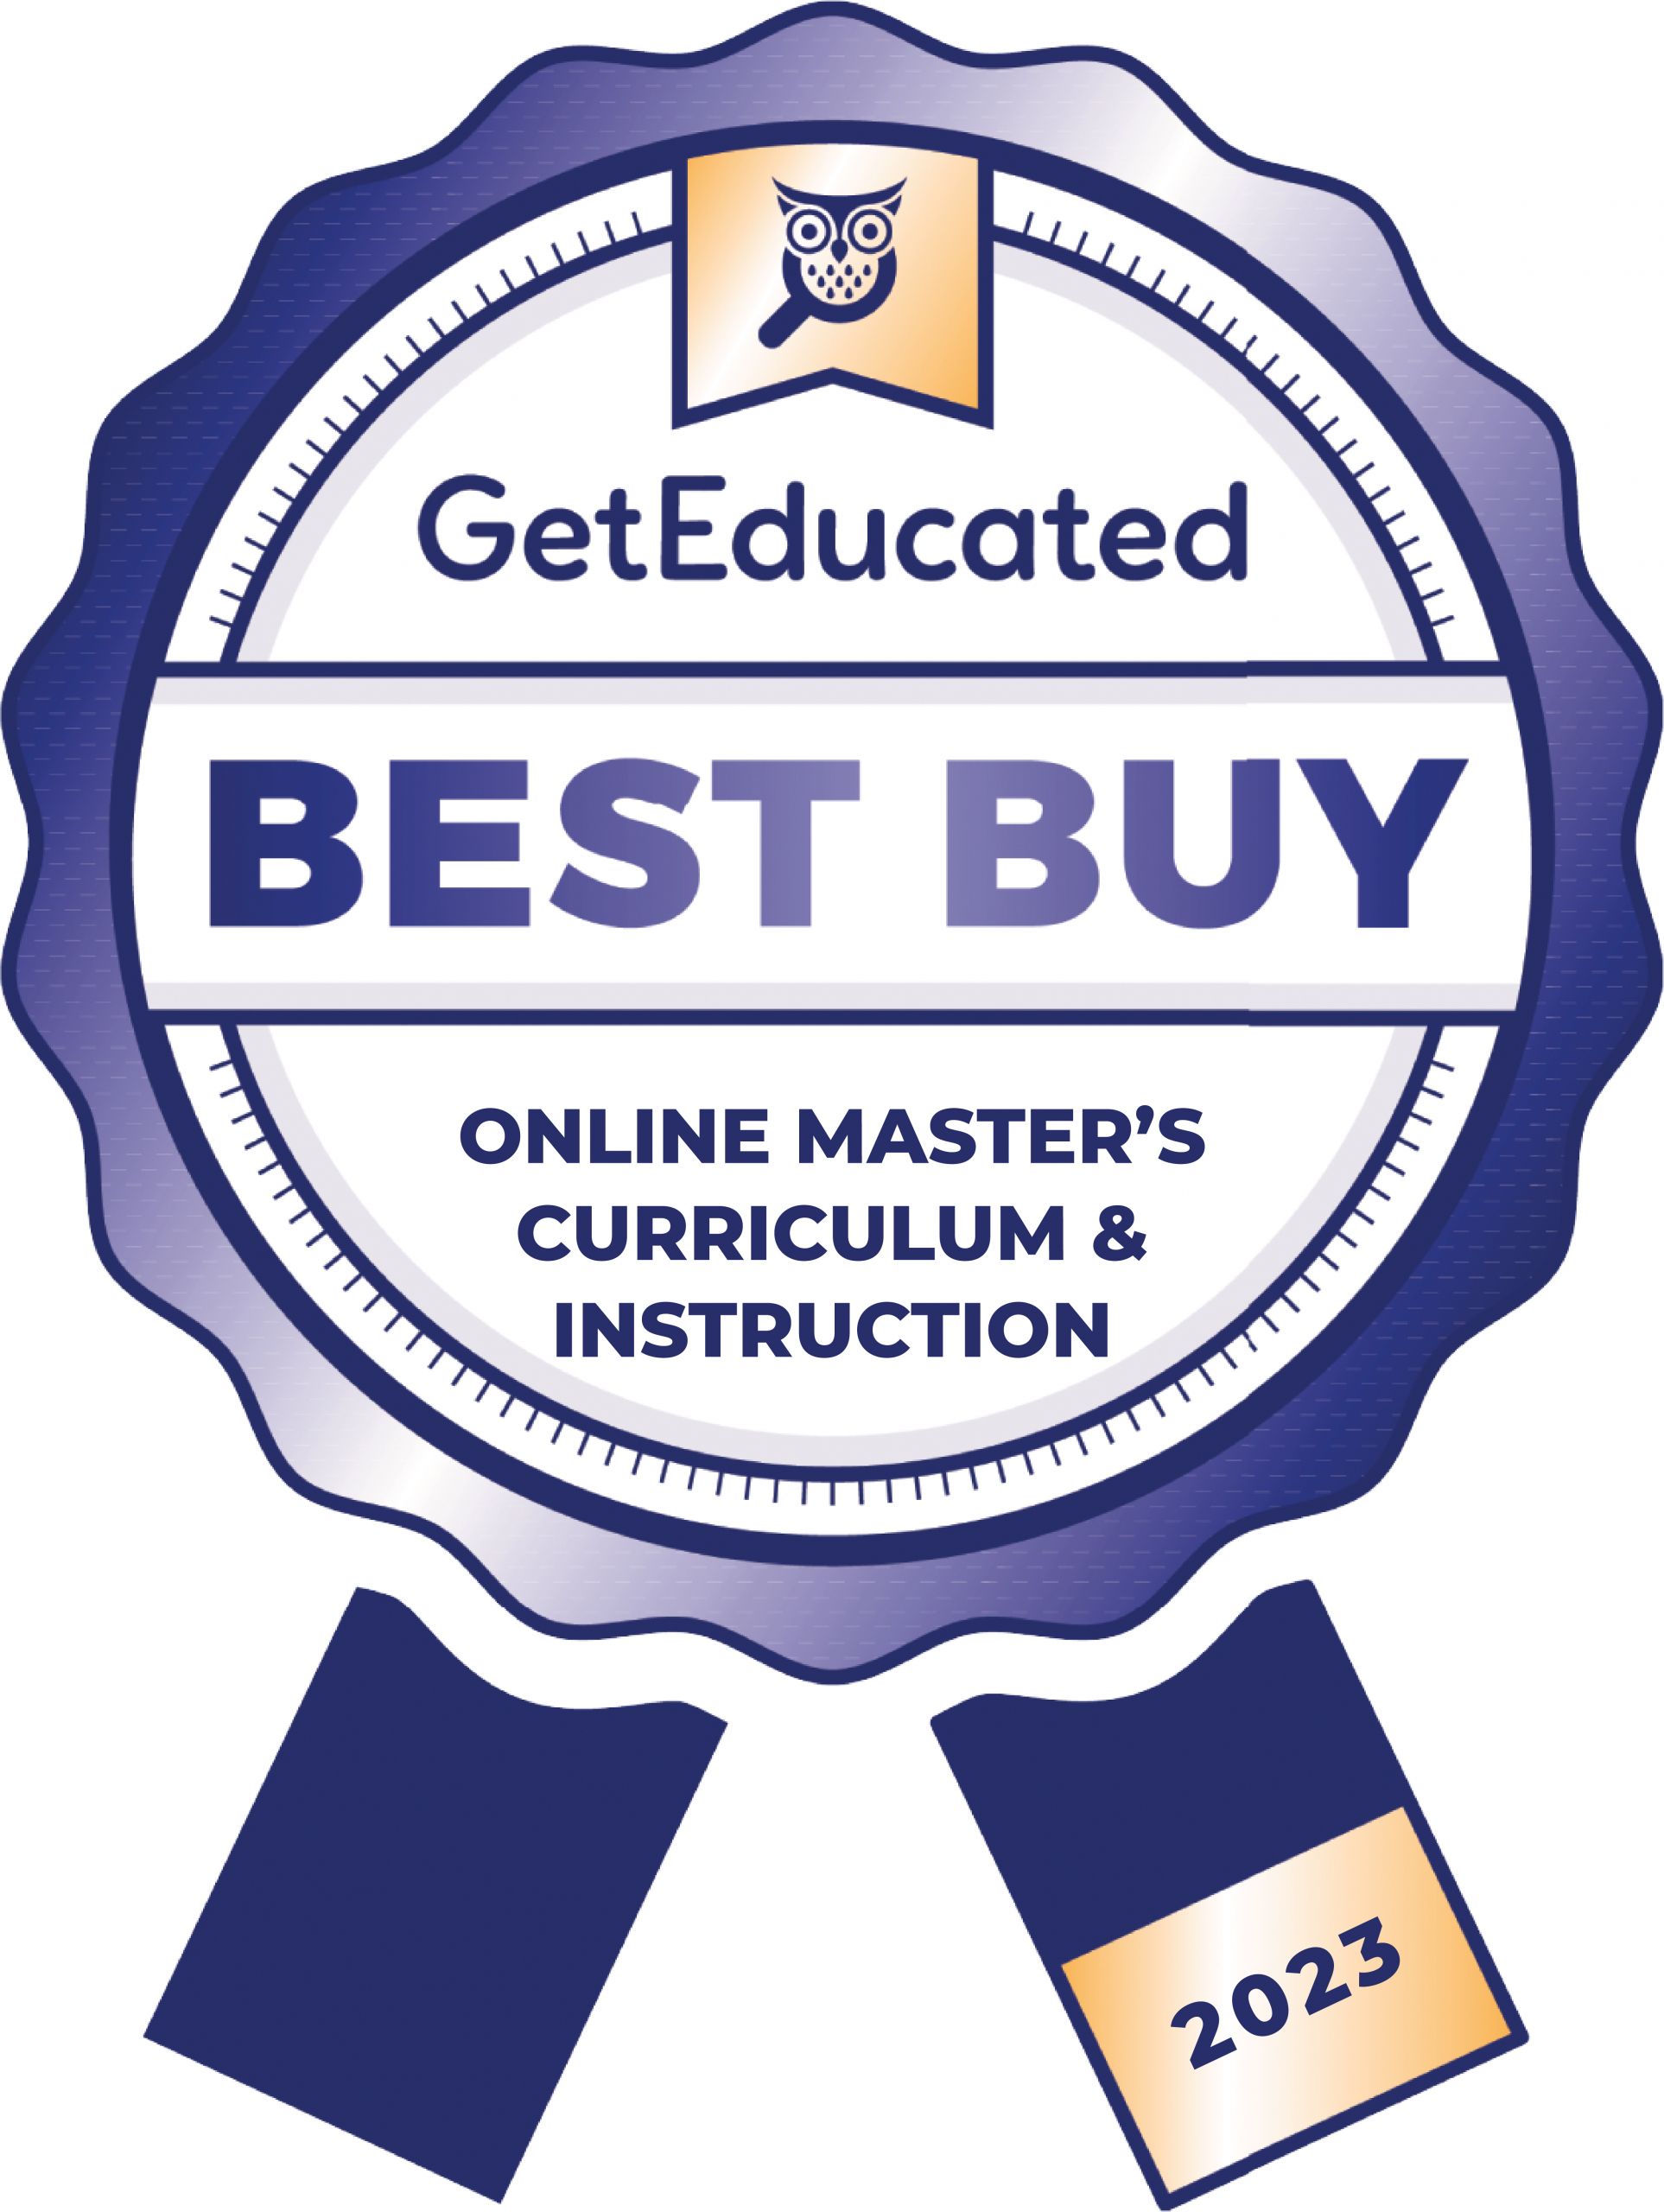 Rankings of the cheapest online master's in curriculum and instruction